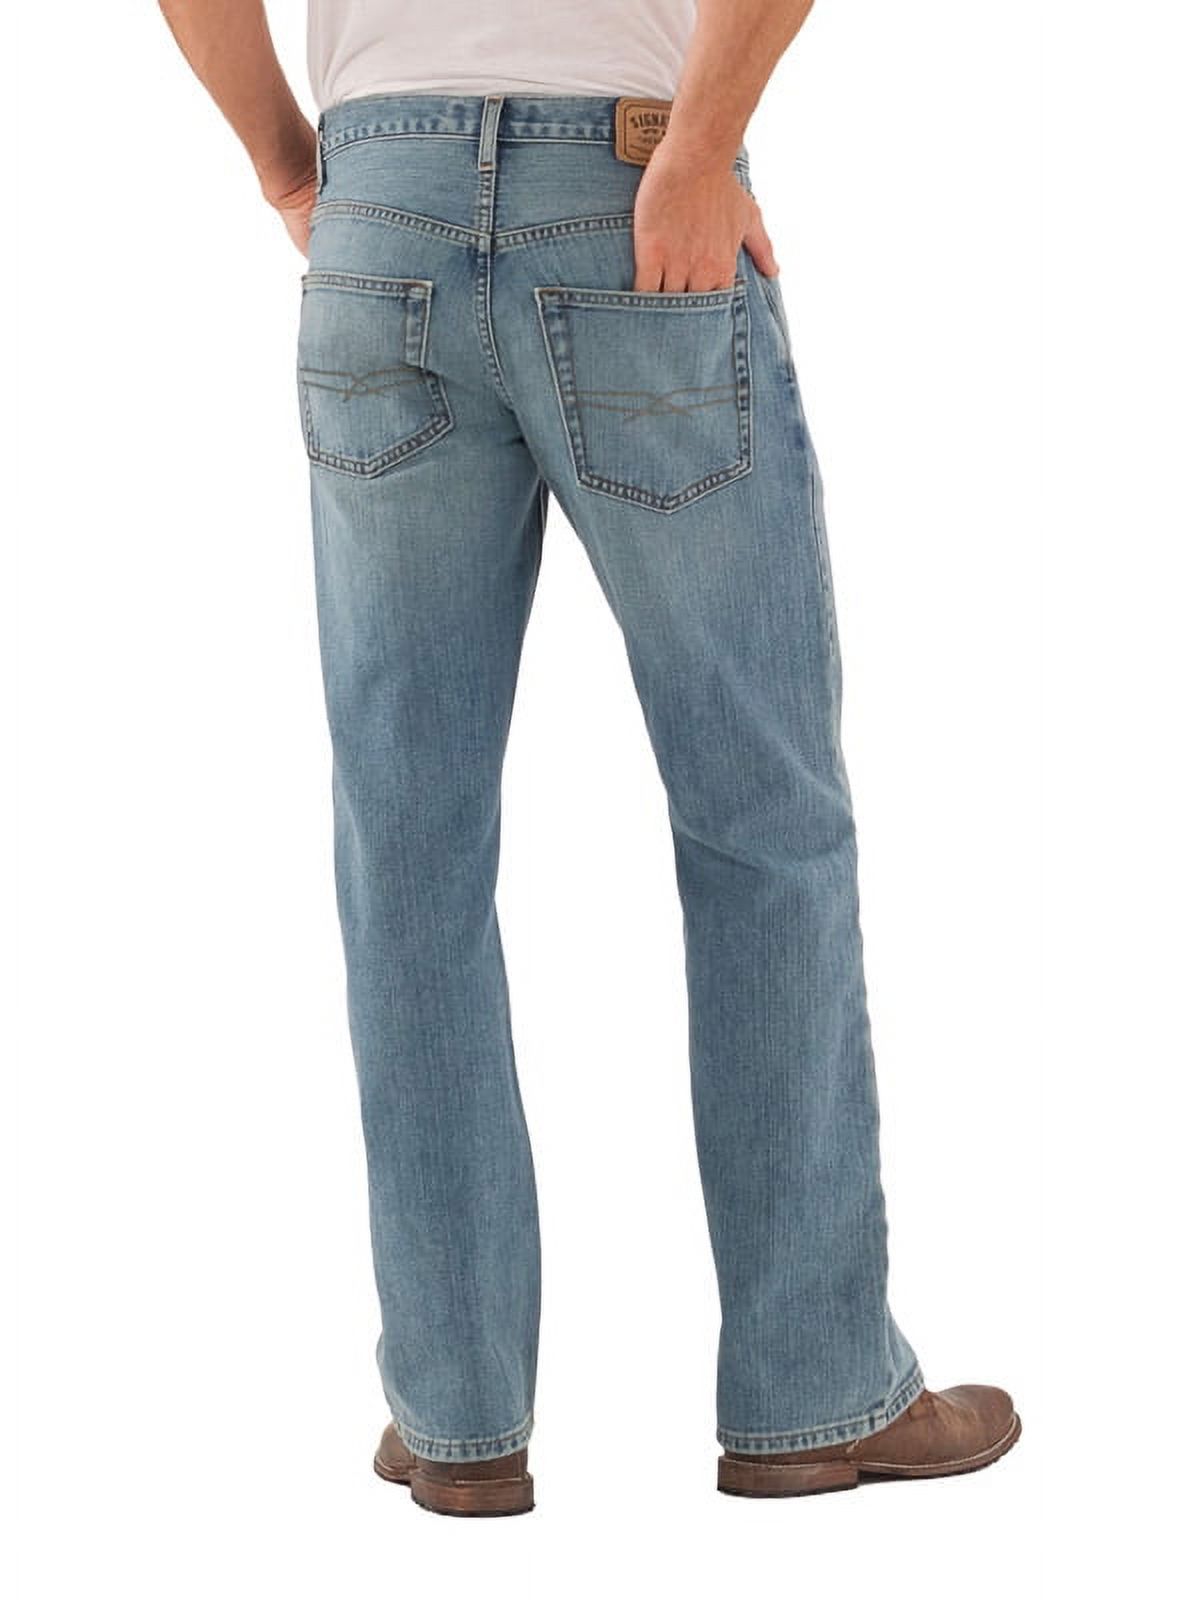 Signature by Levi Strauss & Co. Men's and Big and Tall Bootcut Jeans - image 4 of 7